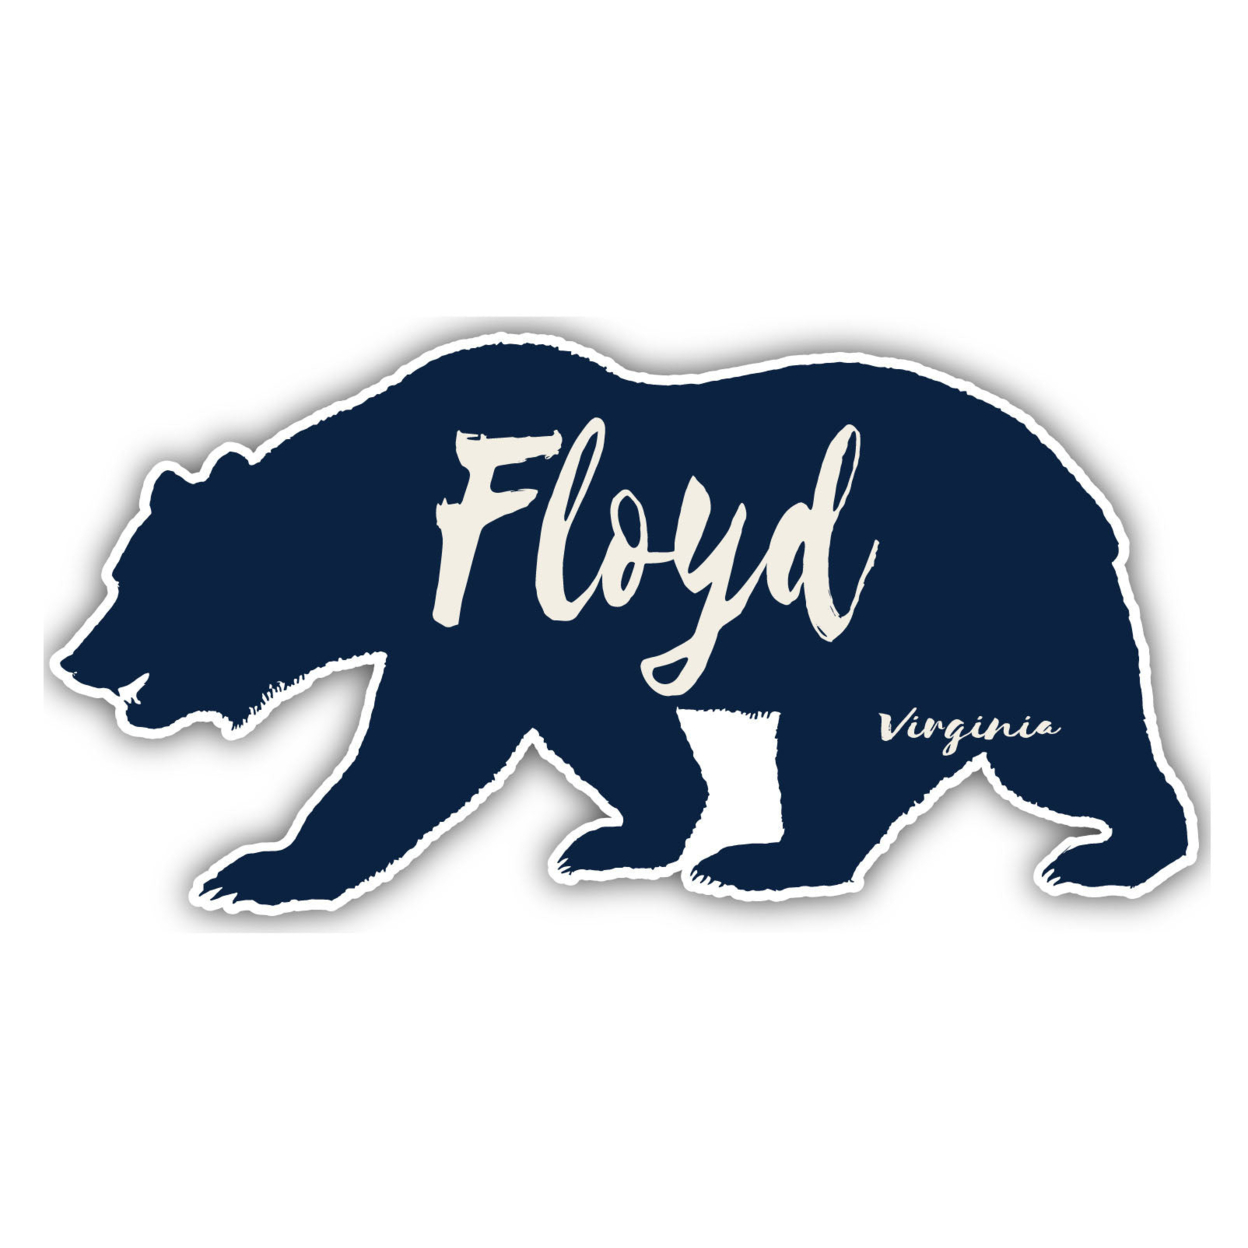 Floyd Virginia Souvenir Decorative Stickers (Choose Theme And Size) - Single Unit, 10-Inch, Great Outdoors